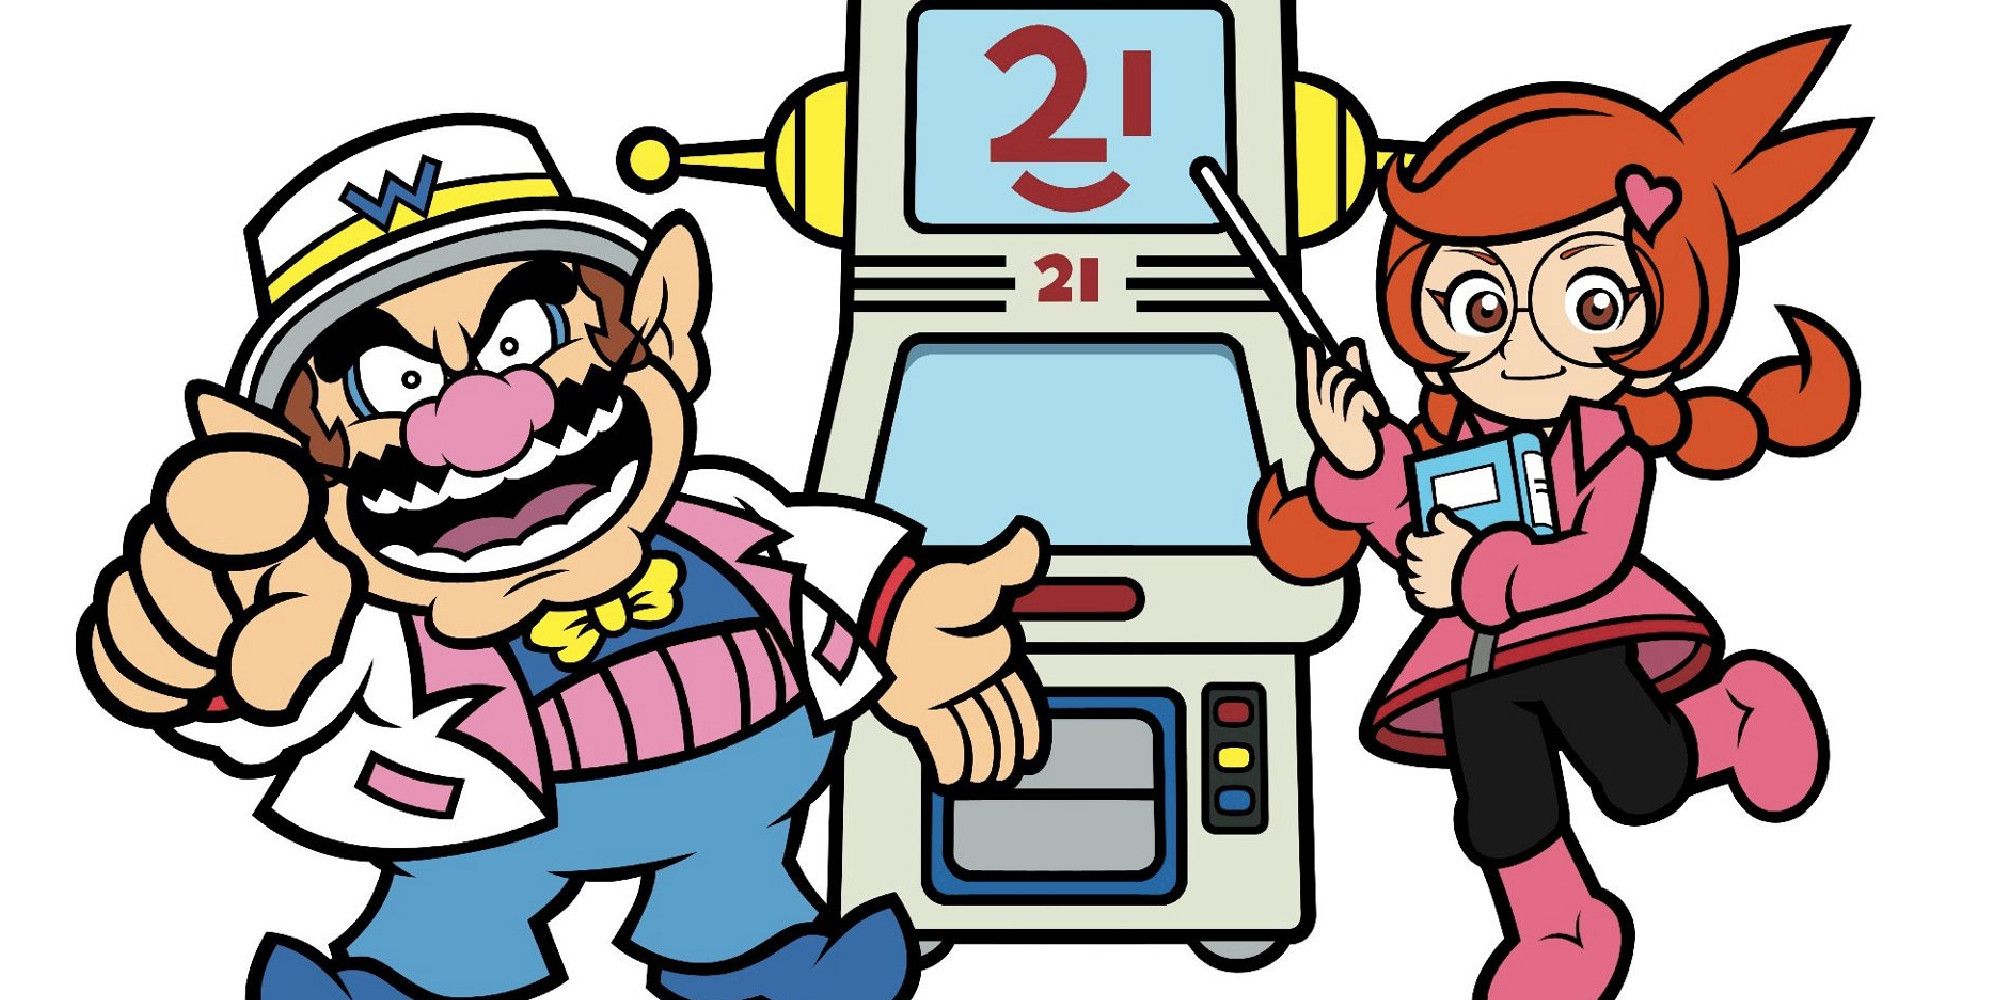 Penny and Wario Asking You to Make Games